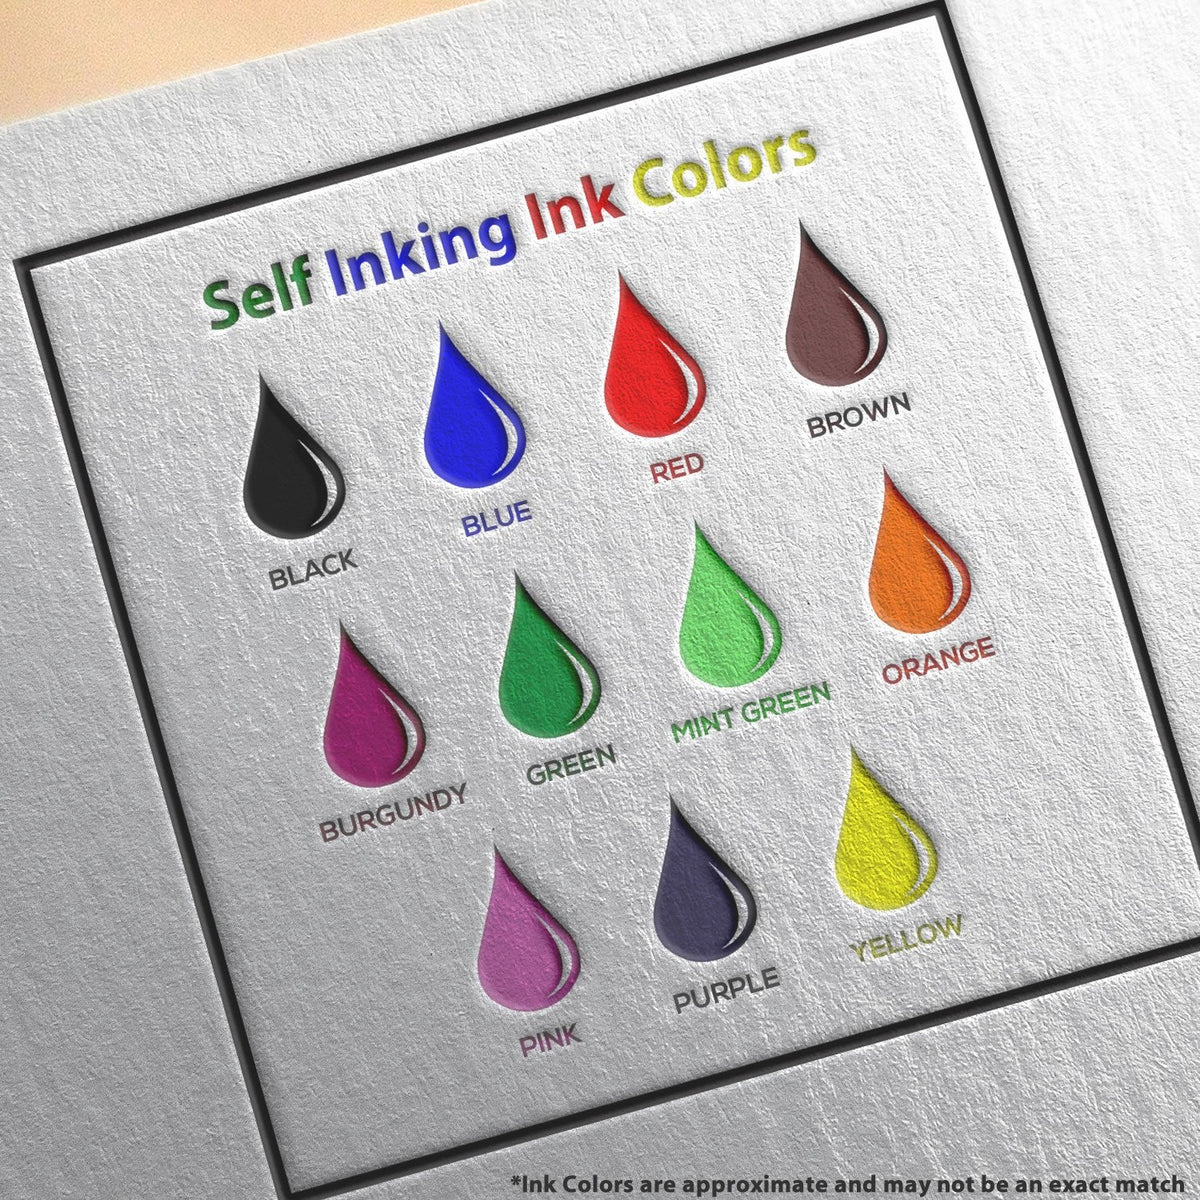 Self-Inking Round Check Your Work Stamp Ink Color Options